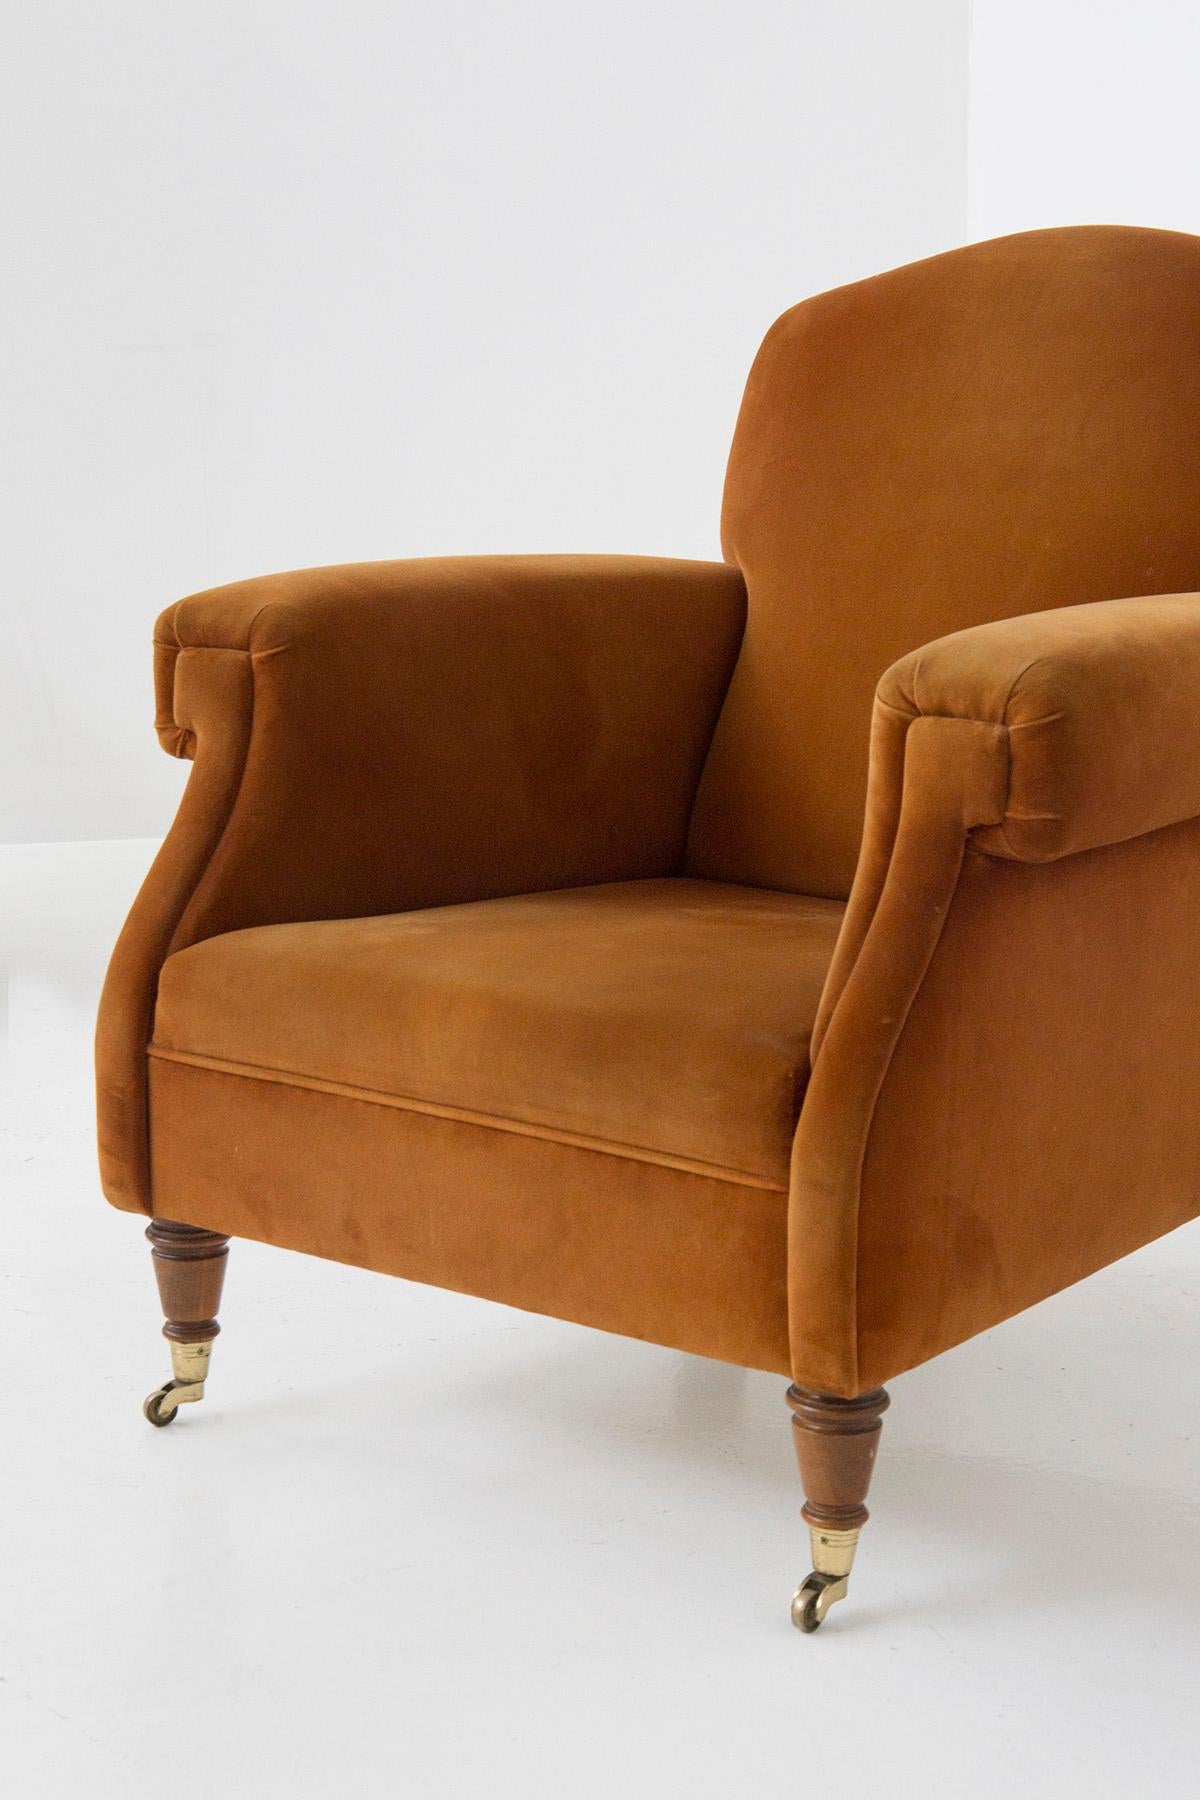 Beautiful pair of English style armchairs made in the 1950s in a beautiful brown velvet.
The armchairs have 4 feet to support the seat: the two at the back are made of a beautiful, durable dark wood, with a sinuous, square shape; the front ones